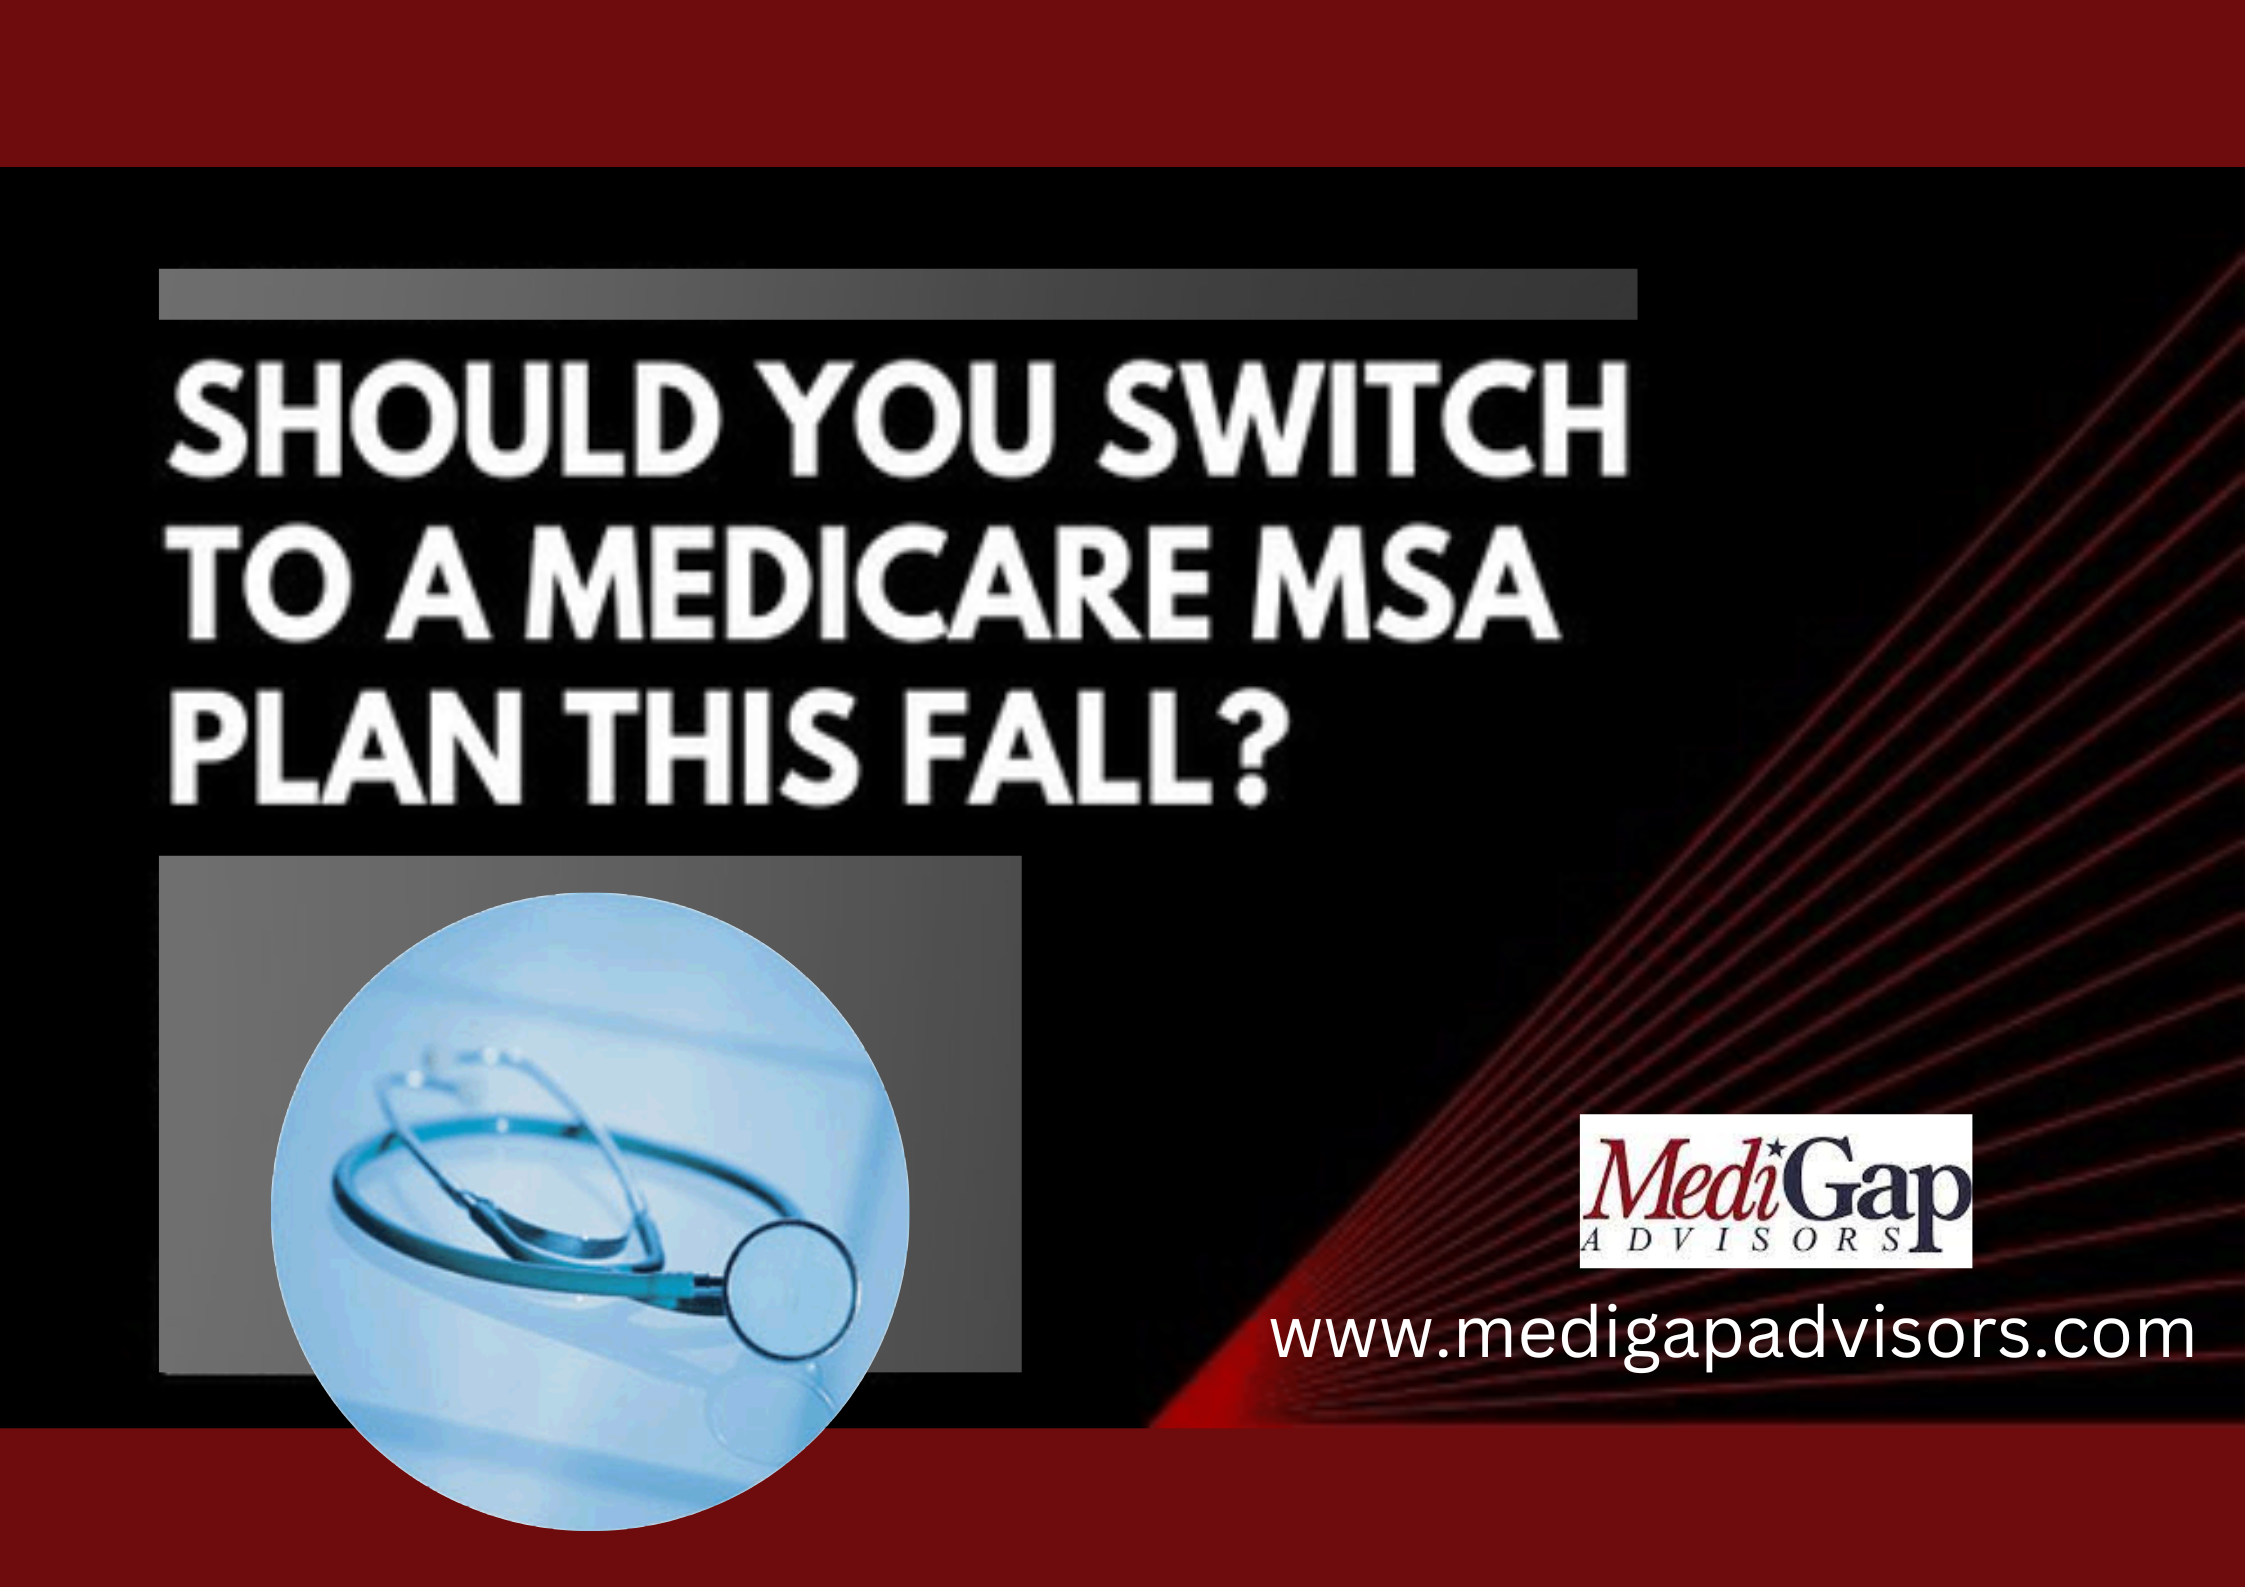 Should You Switch to a Medicare MSA Plan This Fall